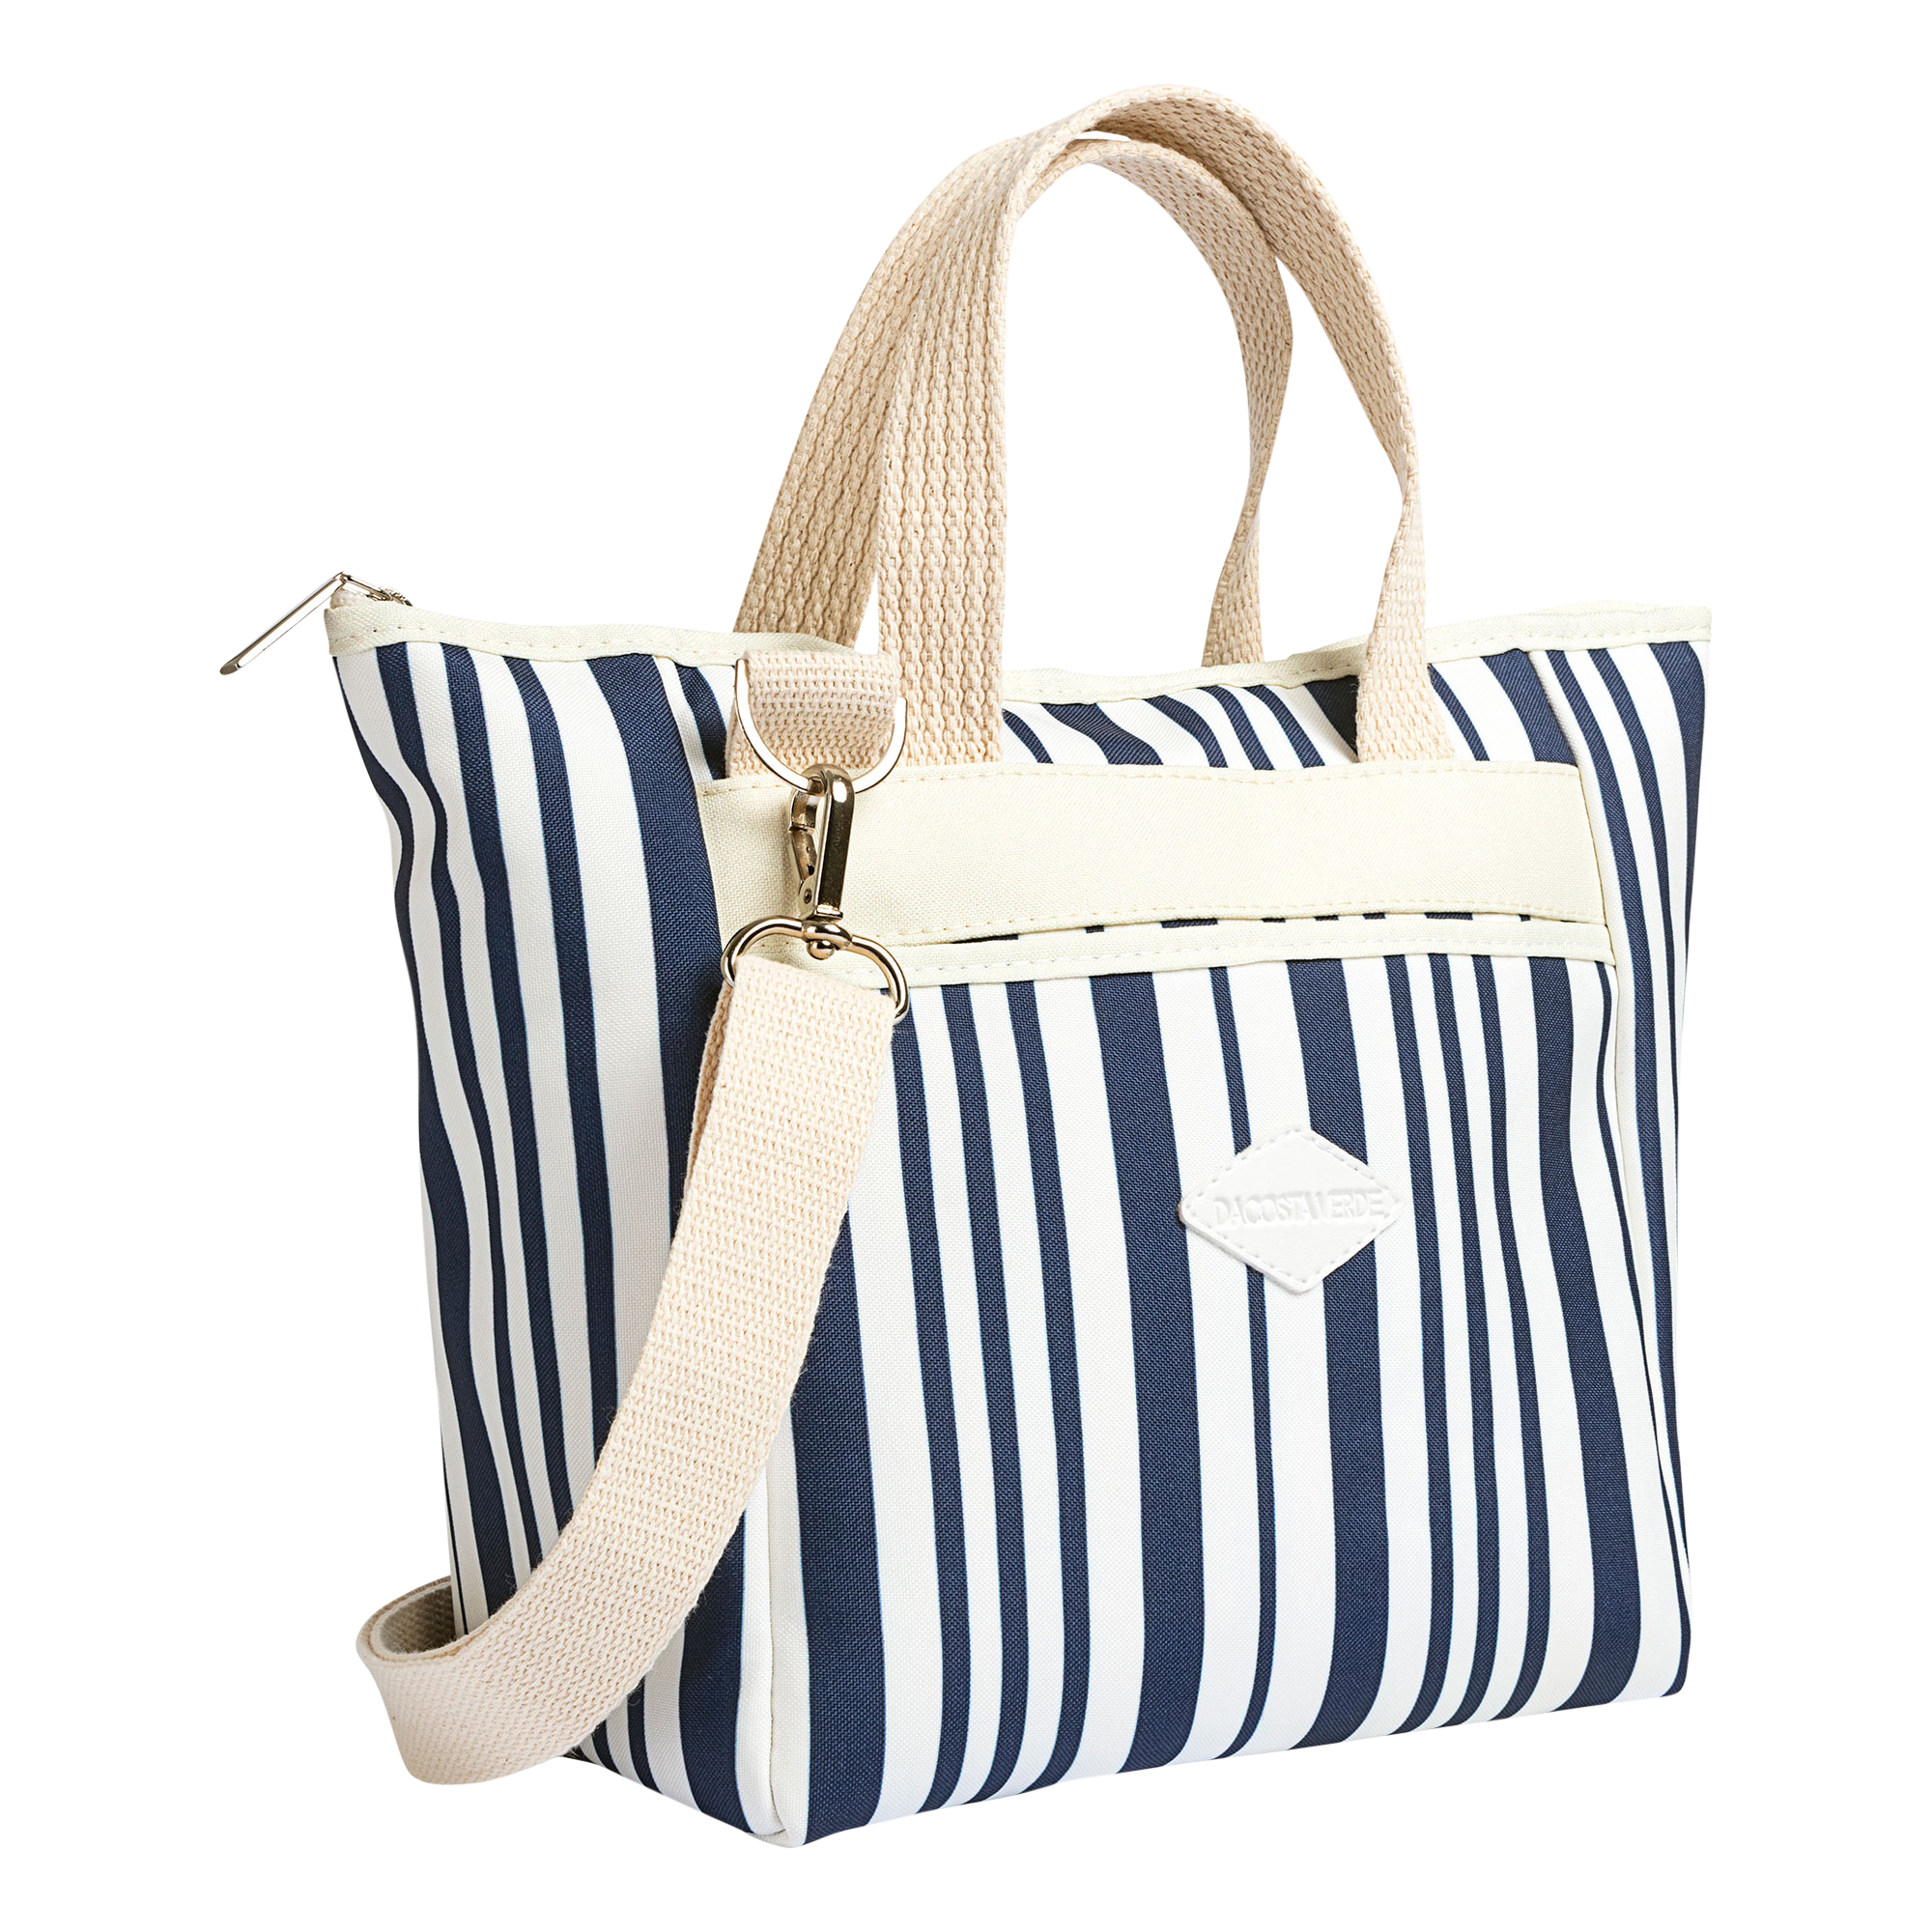 blue the tote bag